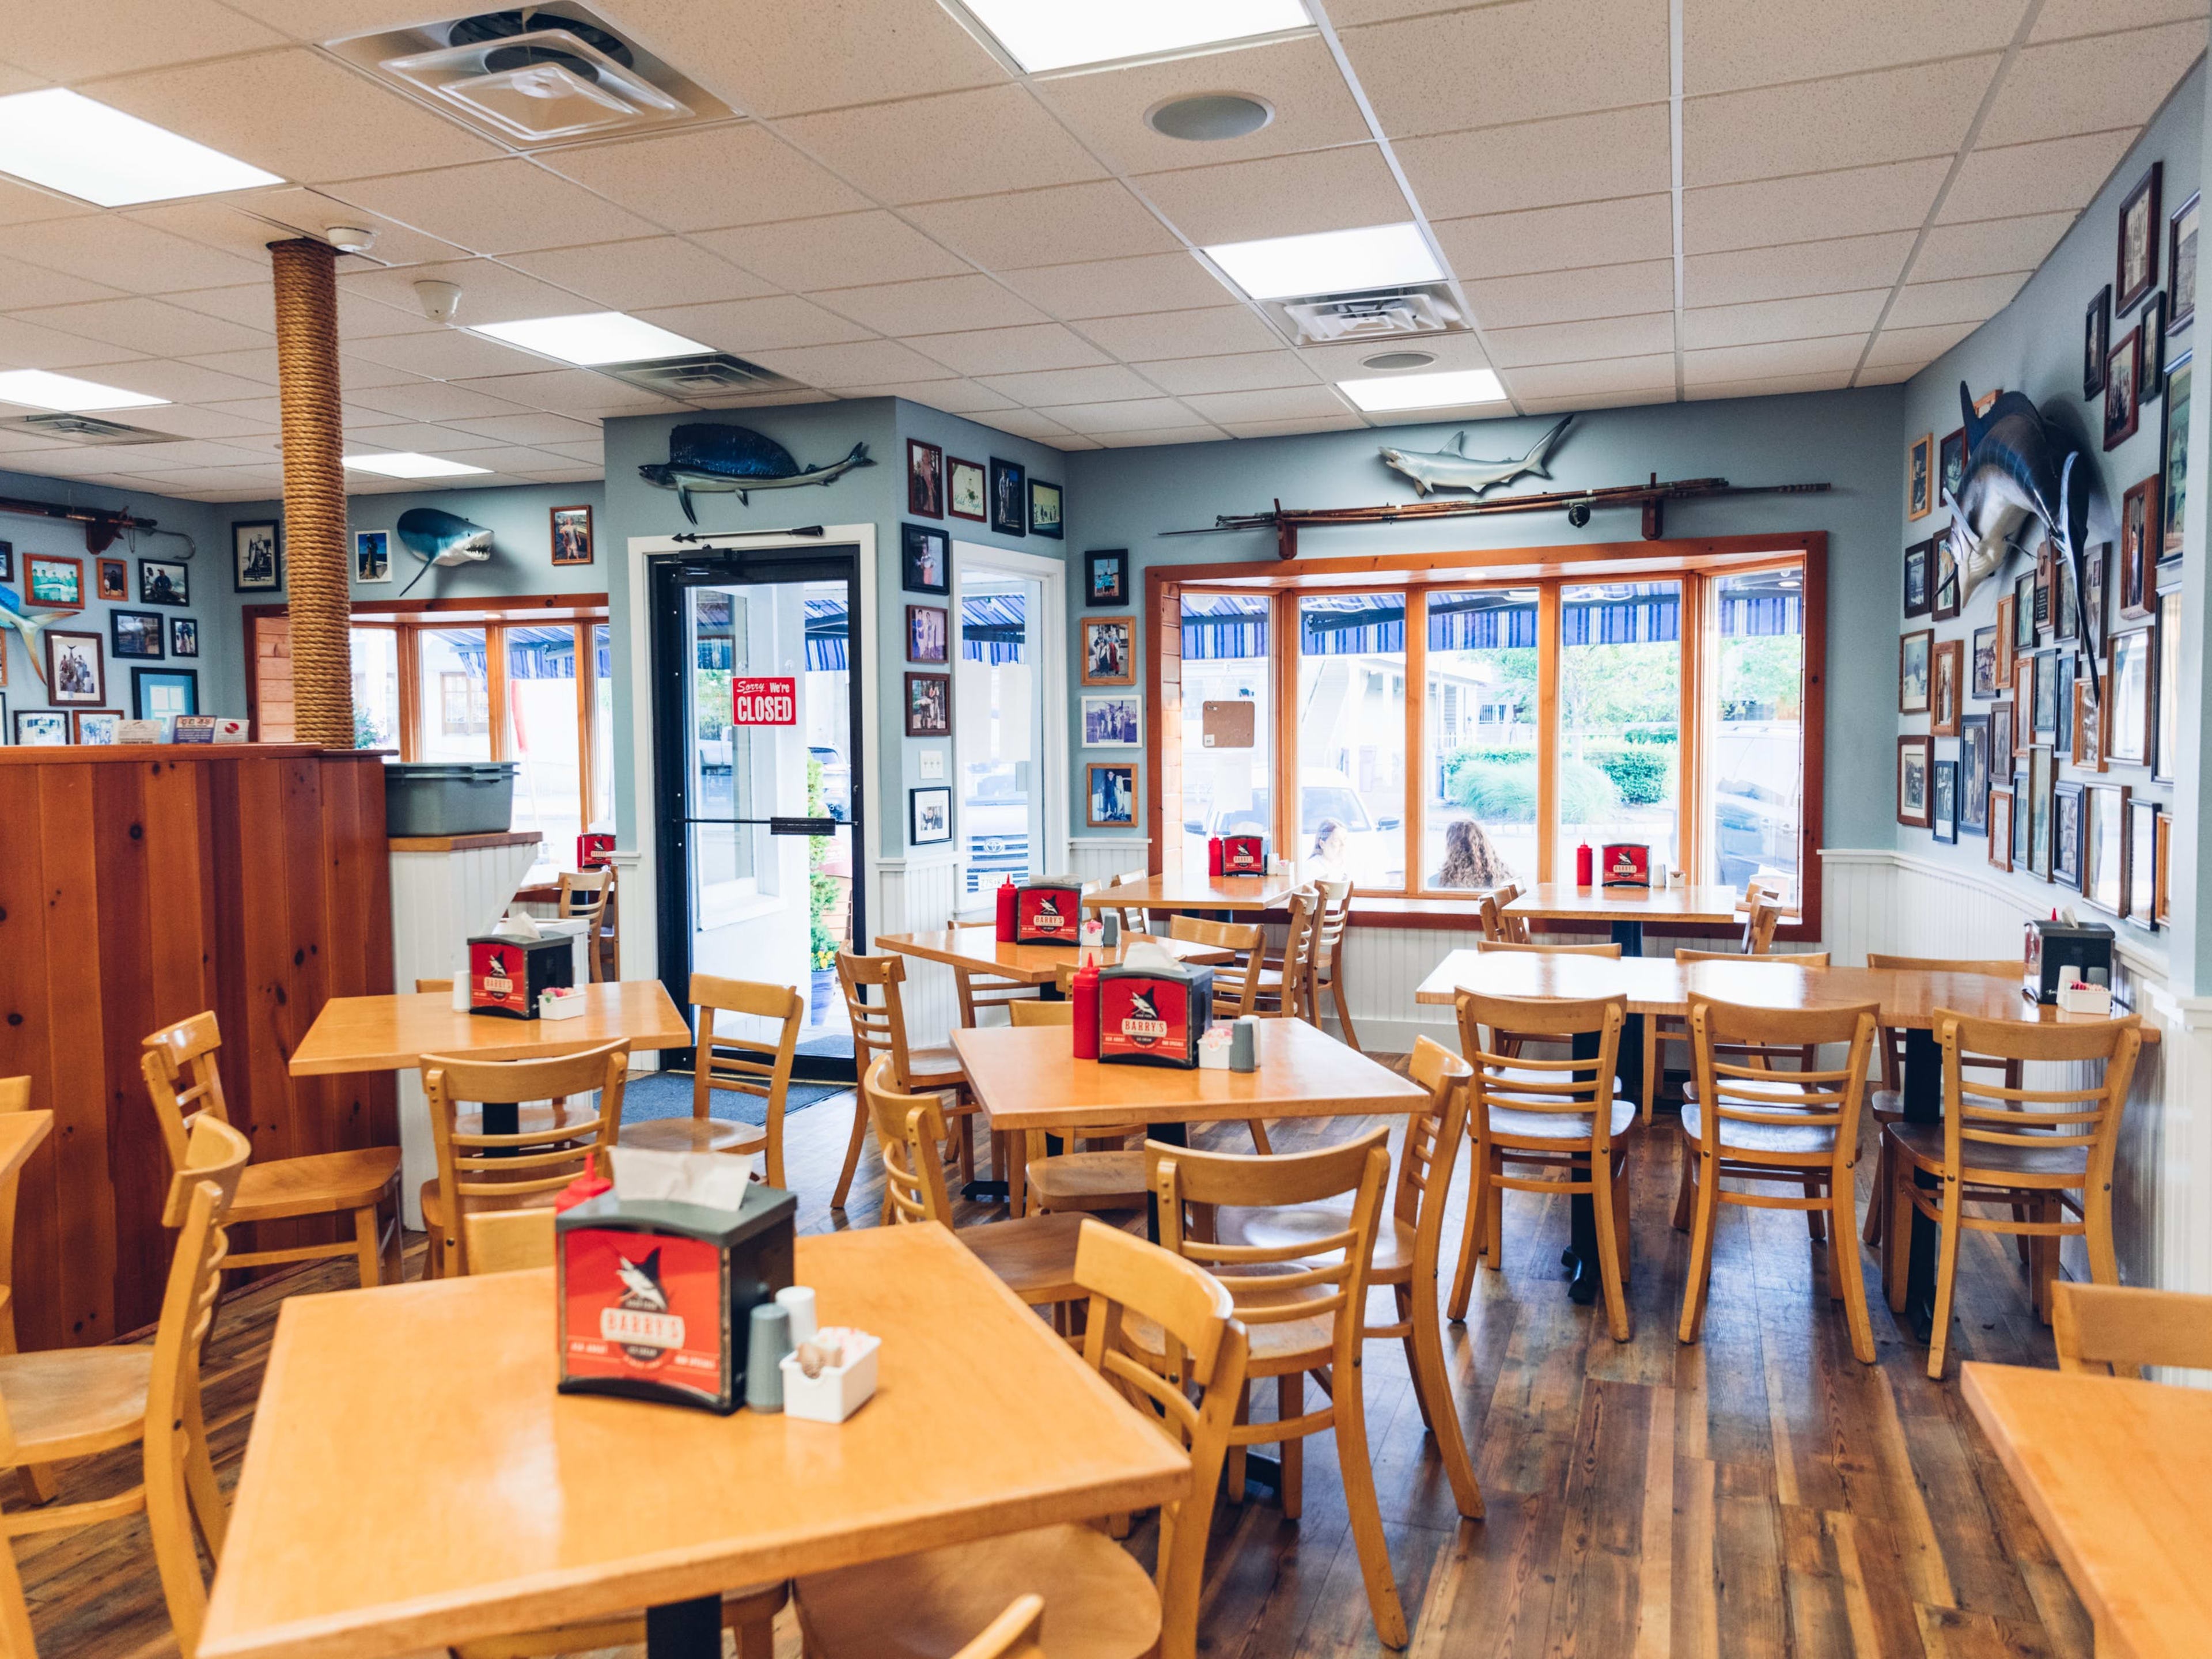 Barry's do me a flavor interiors with wooden tables and fish hung on the walls